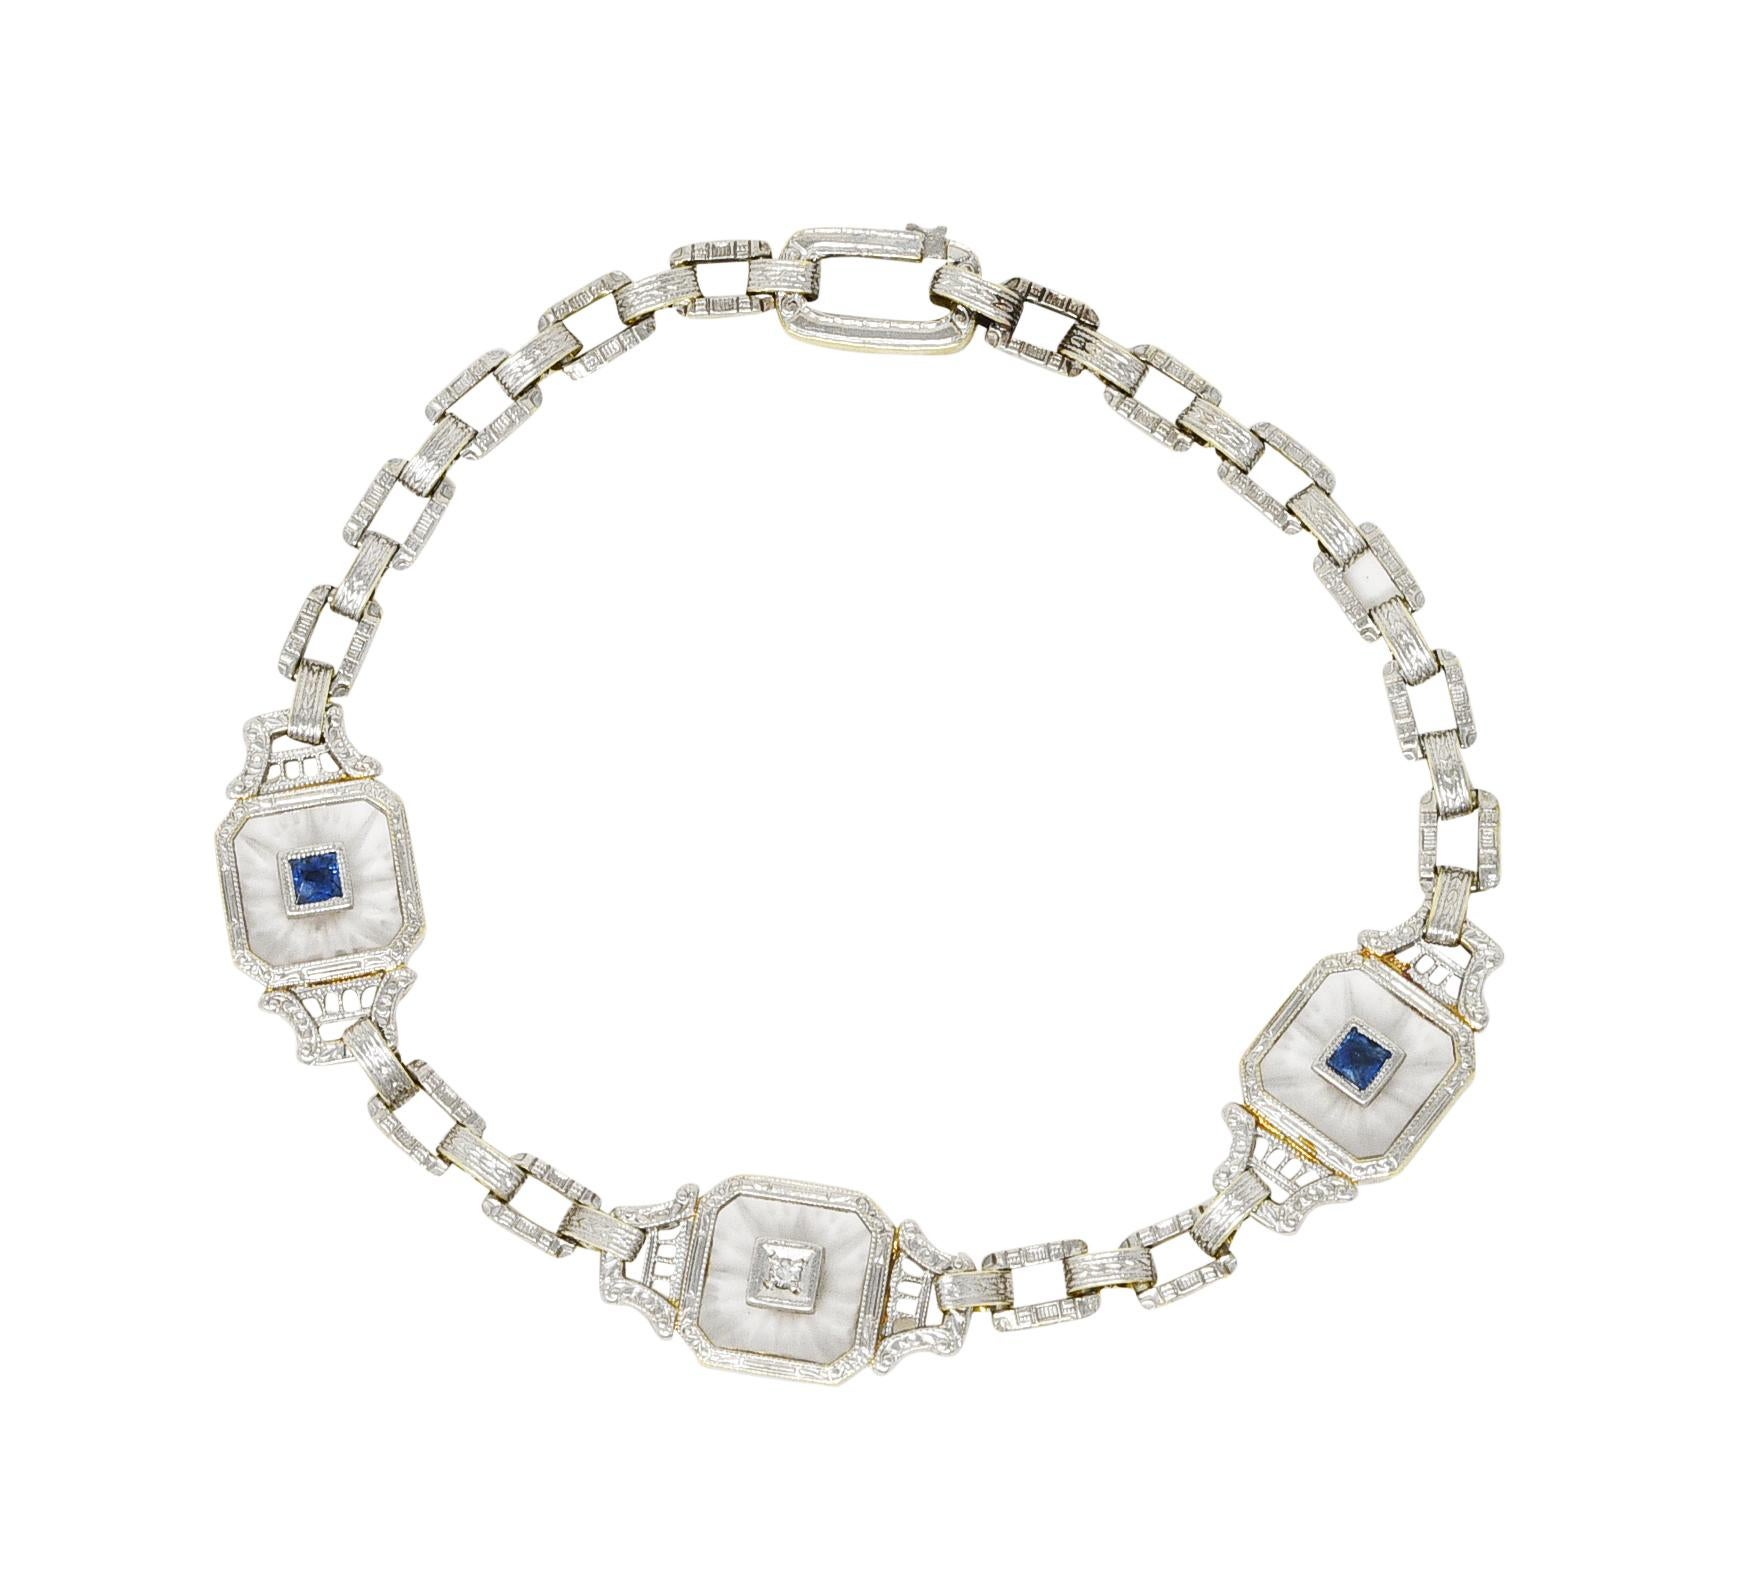 Linked bracelet features three octagonal stations with pierced striation and engraved details. Each is bezel set with frosted camphor glass depicting a burst motif - 8.0 x 8.0 mm. Centering white gold square forms one set with a diamond and two with